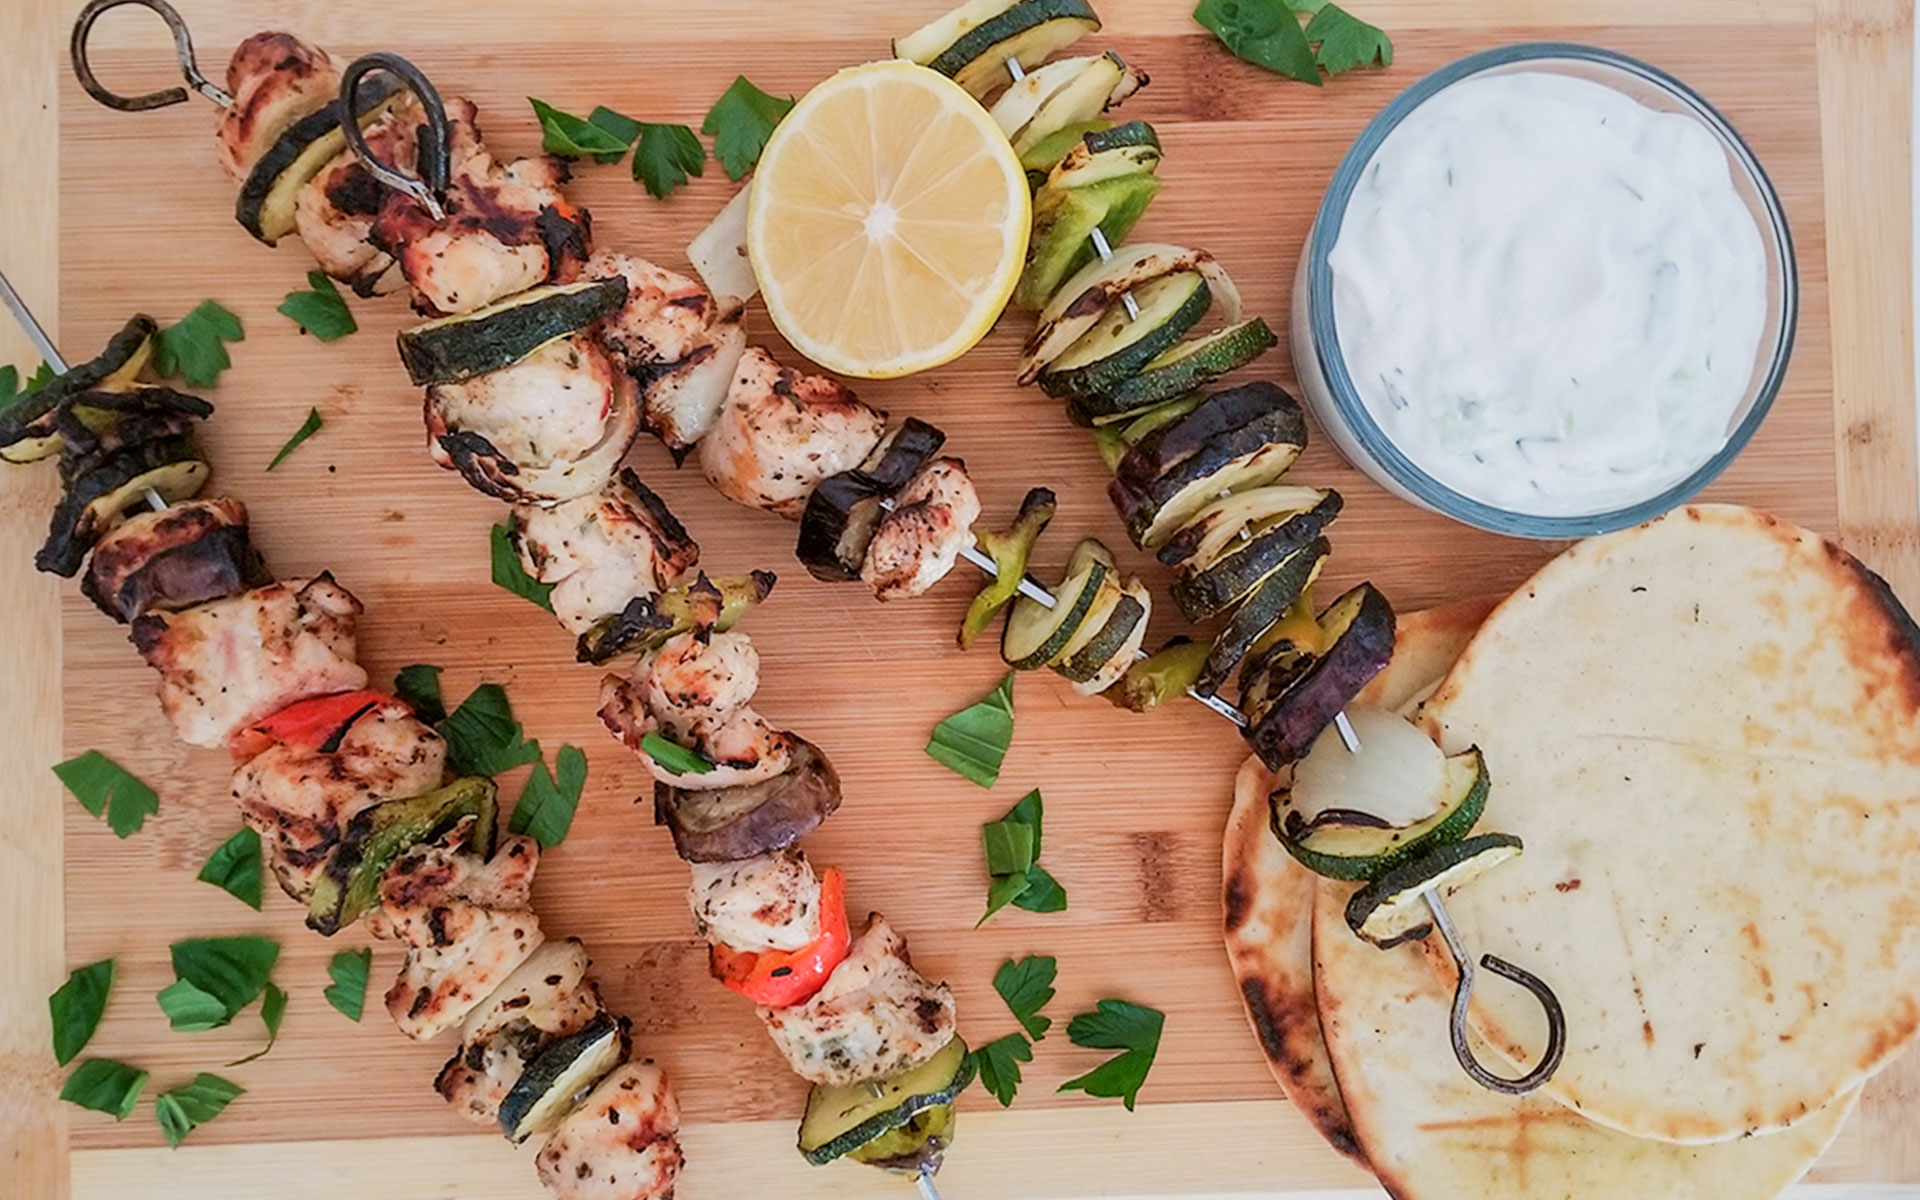 grilled chicken and vegetable souvlaki with tzatziki sauce and grilled pita bread